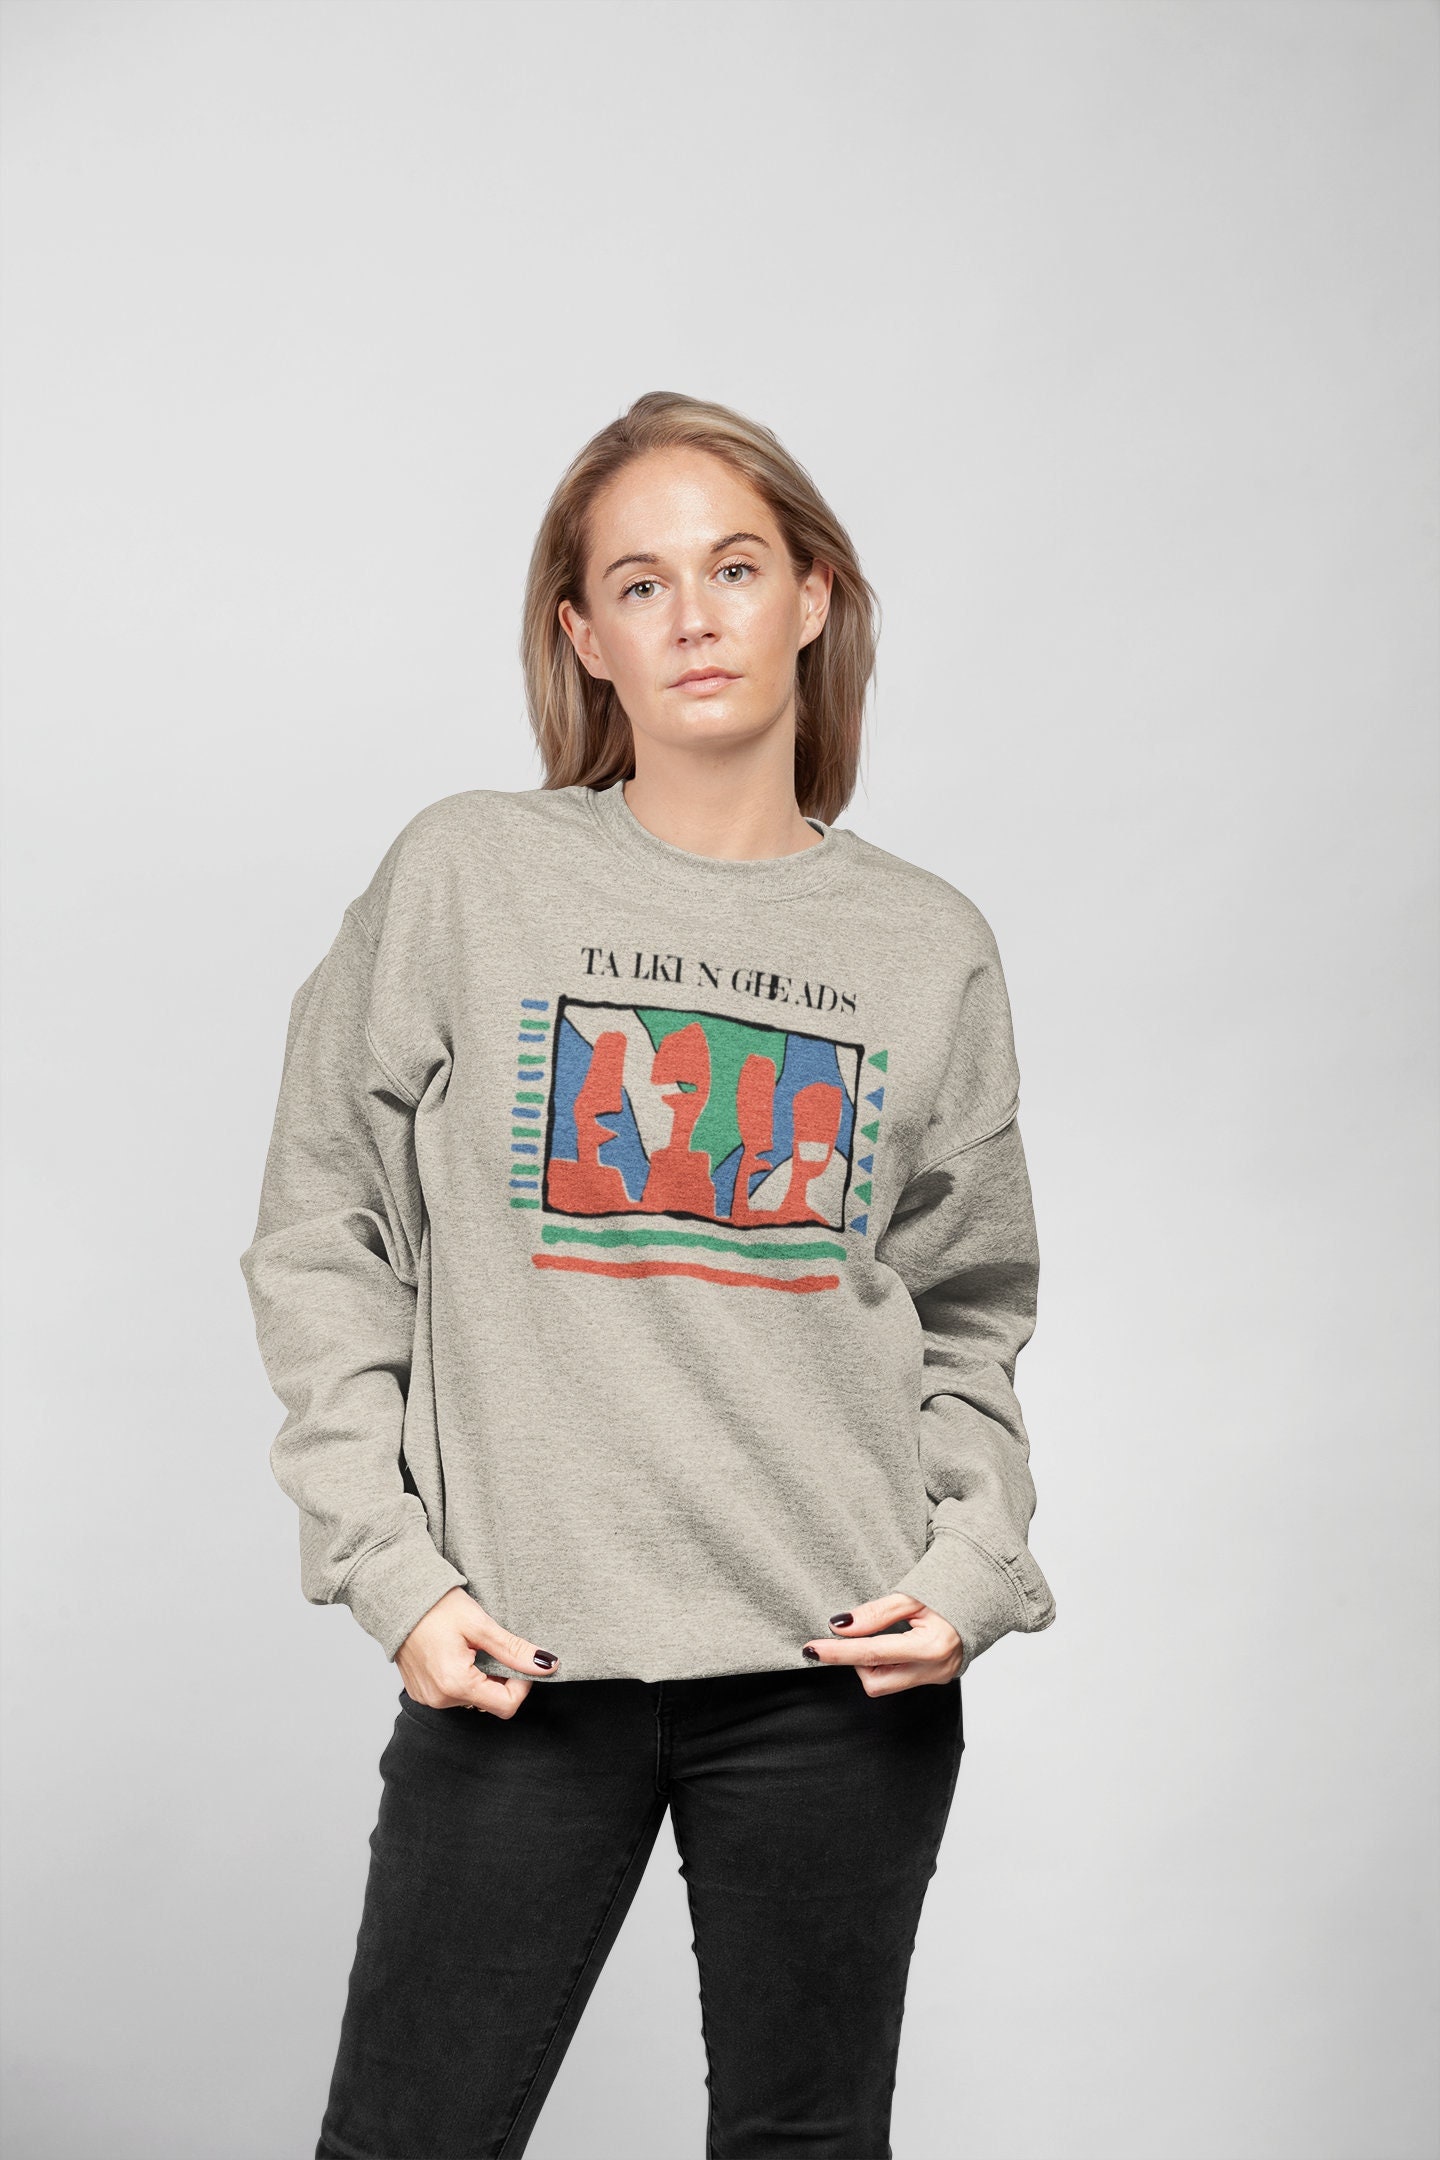 Talking Heads Vintage Graphic Sweatshirt Unisex This Must Be The Place sold  by Lumusi, SKU 38441887